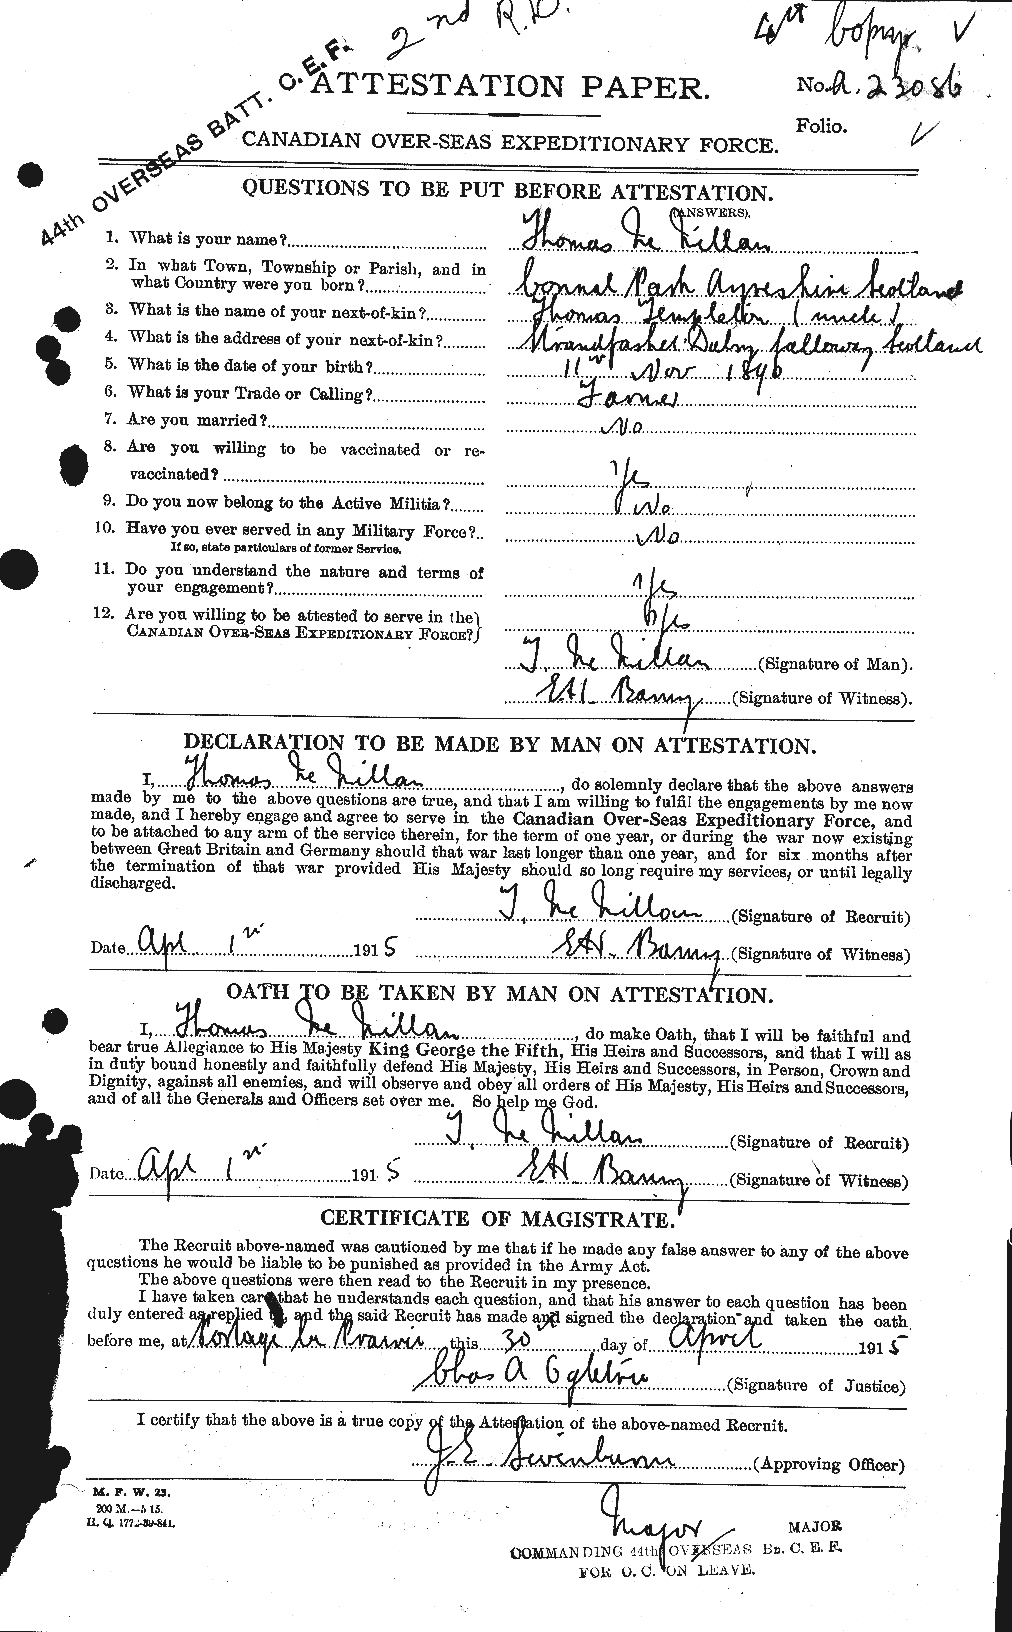 Personnel Records of the First World War - CEF 536962a